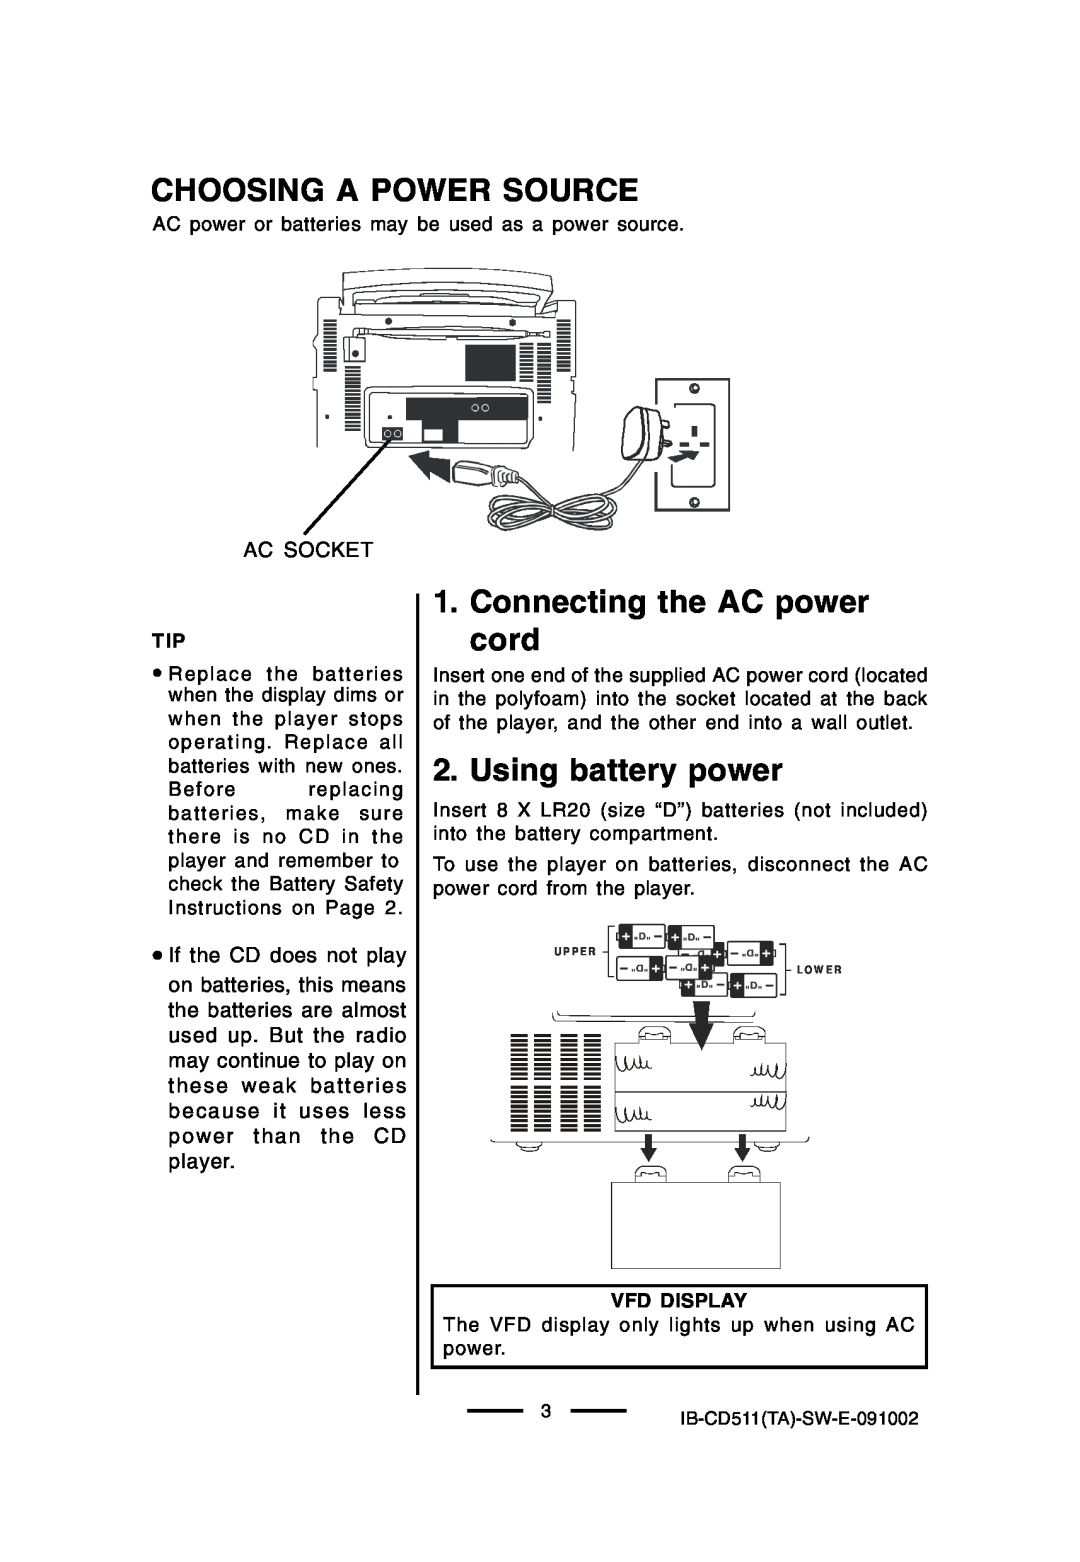 Lenoxx Electronics CD-511 manual Choosing A Power Source, Connecting the AC power cord, Using battery power, Ac Socket 